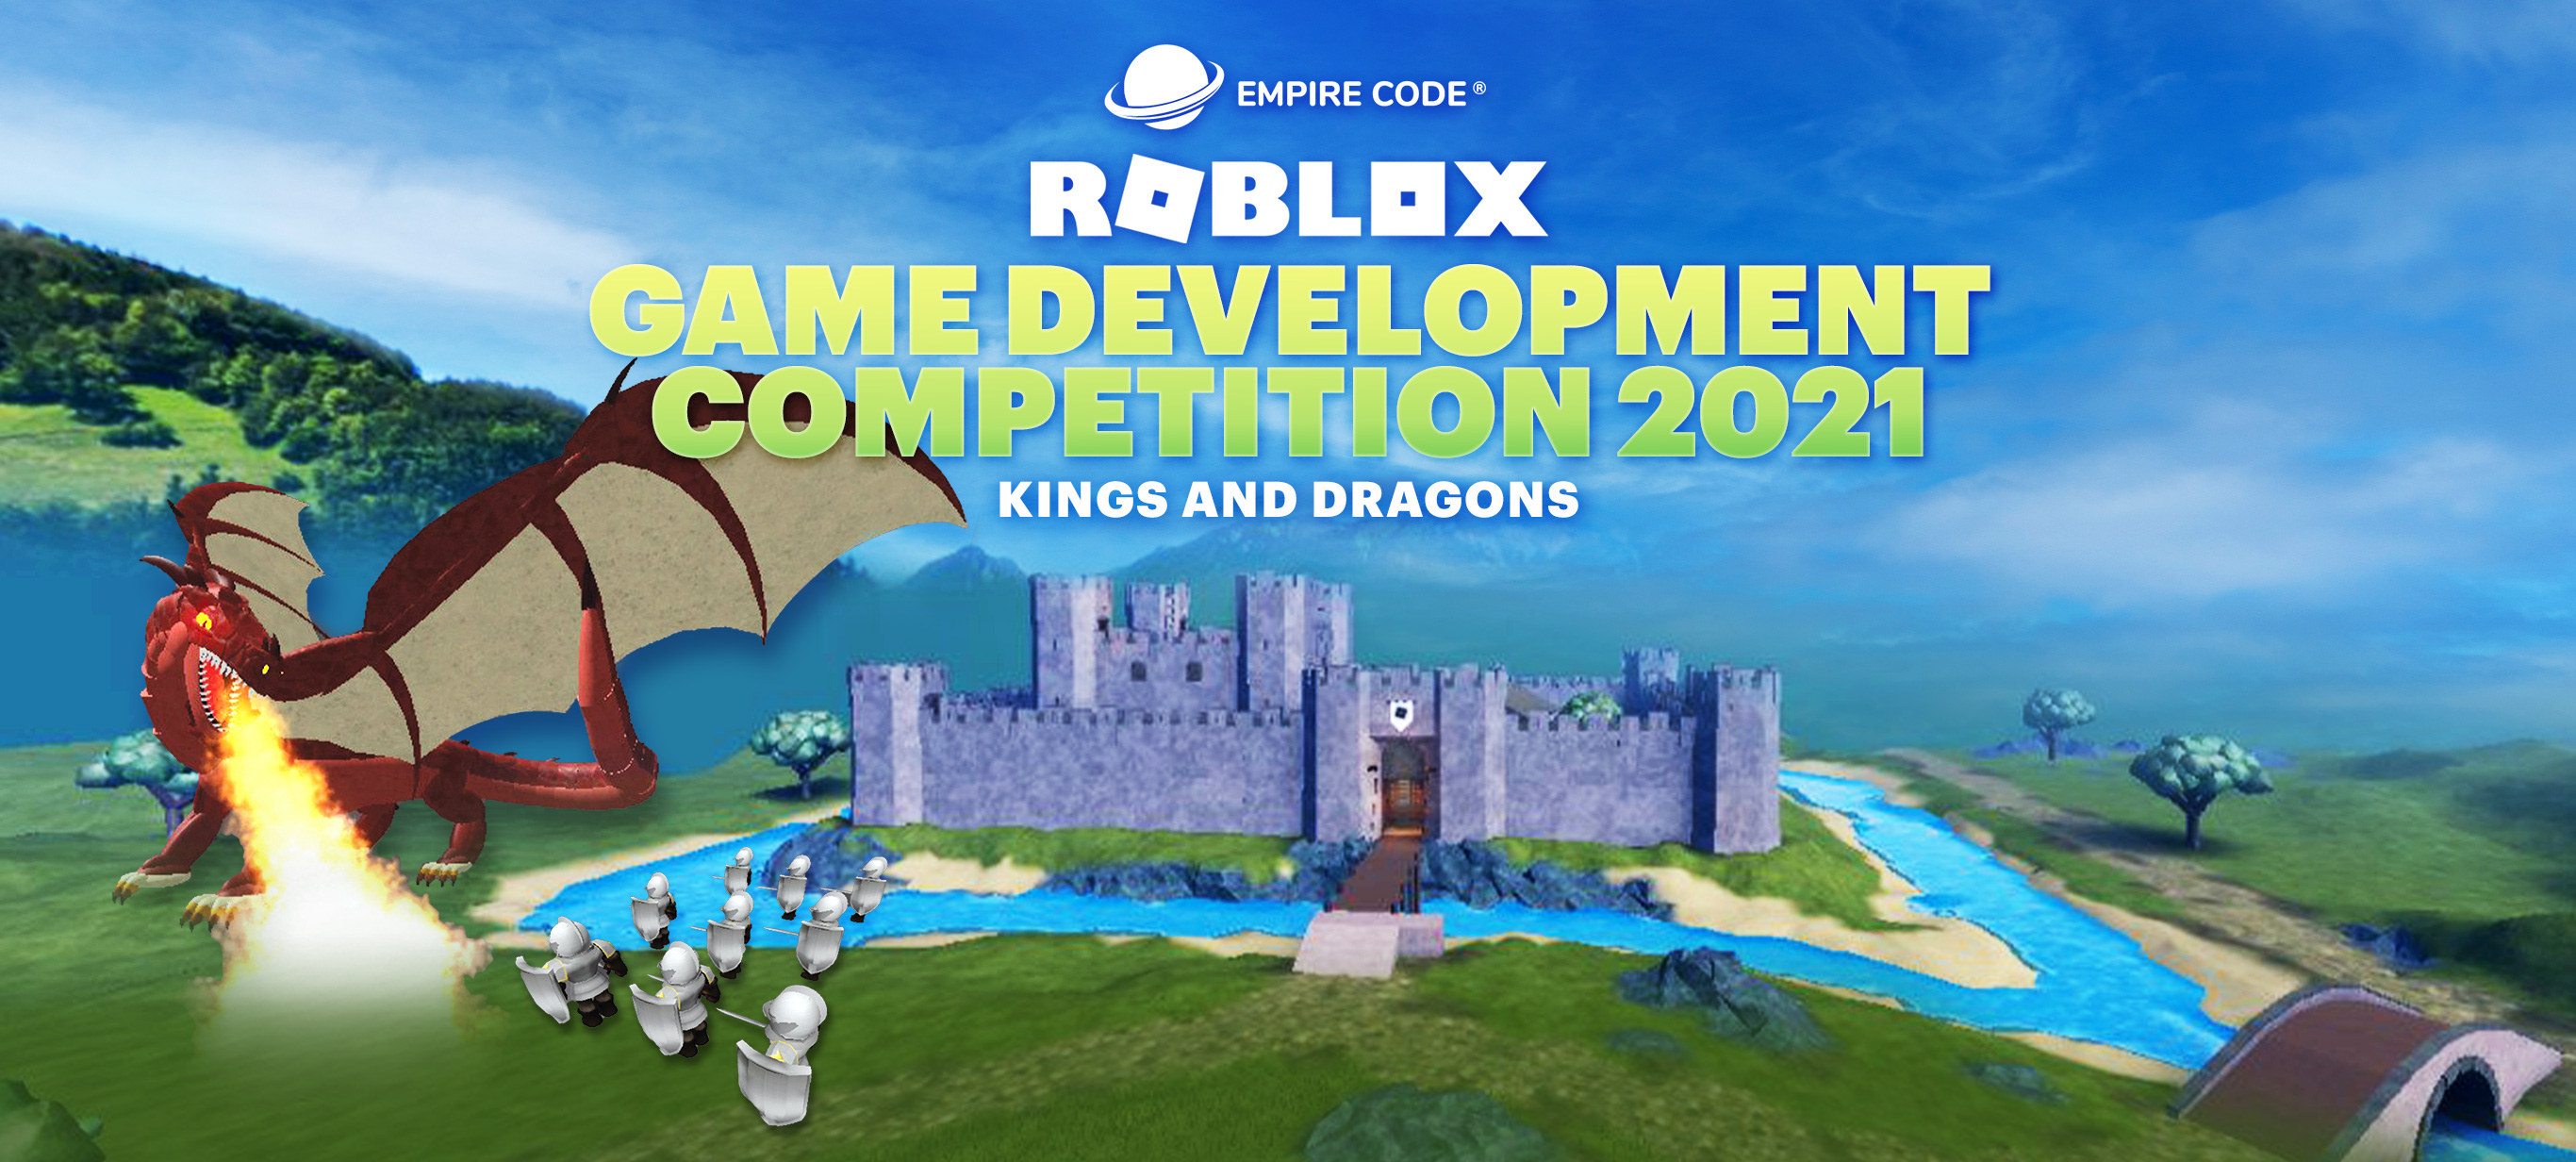 Roblox Competition 2021